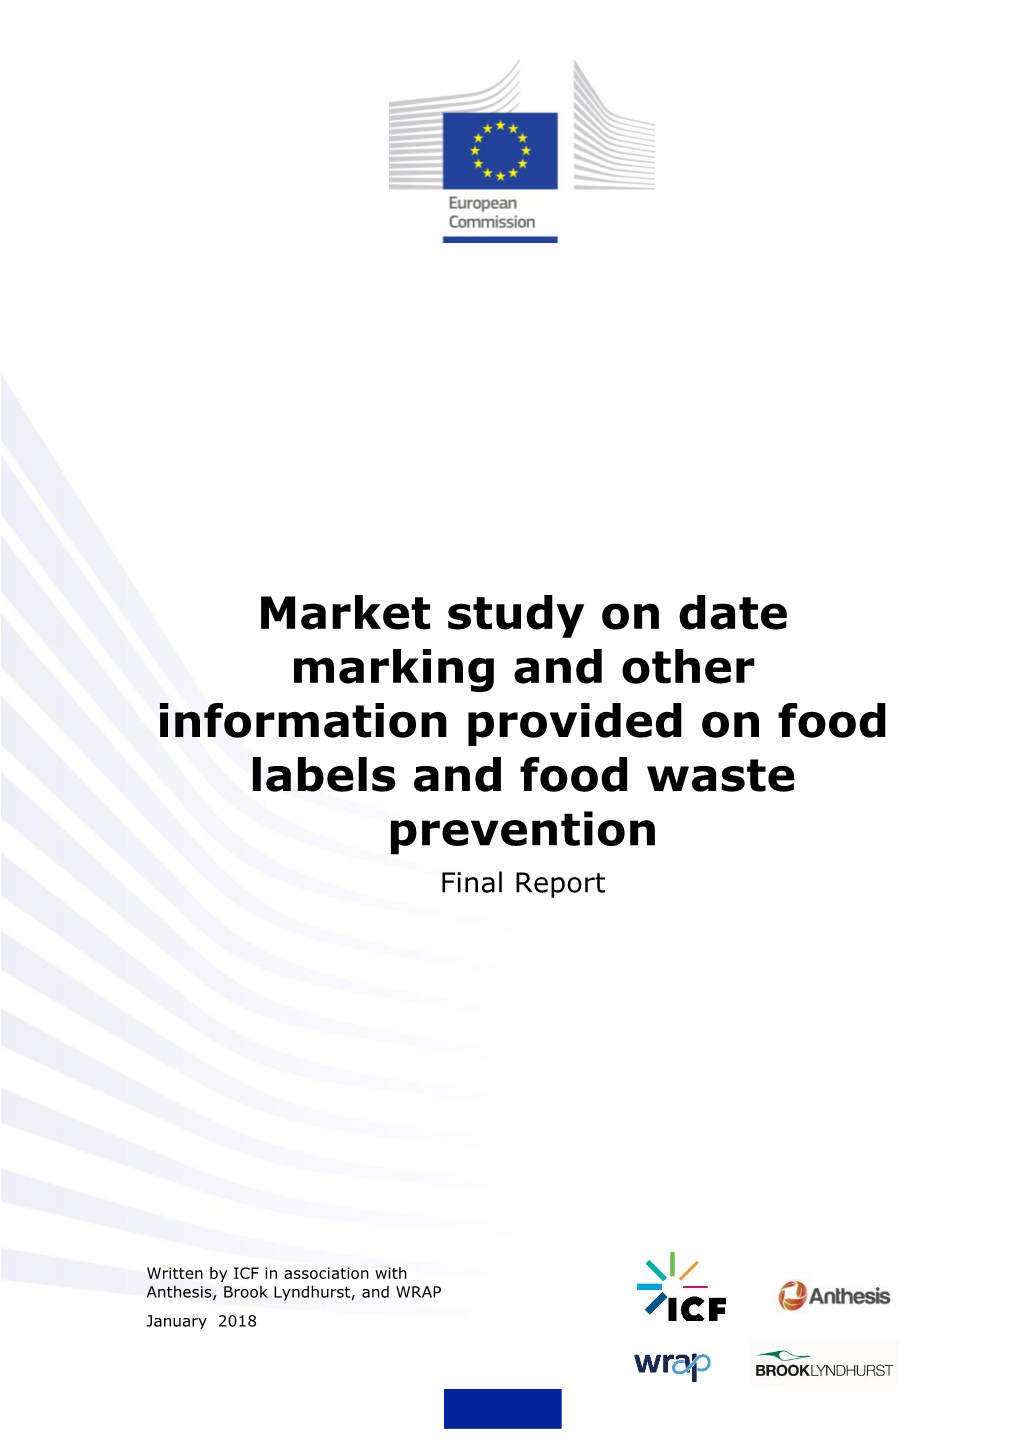 Market Study on Date Marking and Other Information Provided on Food Labels and Food Waste Prevention Final Report